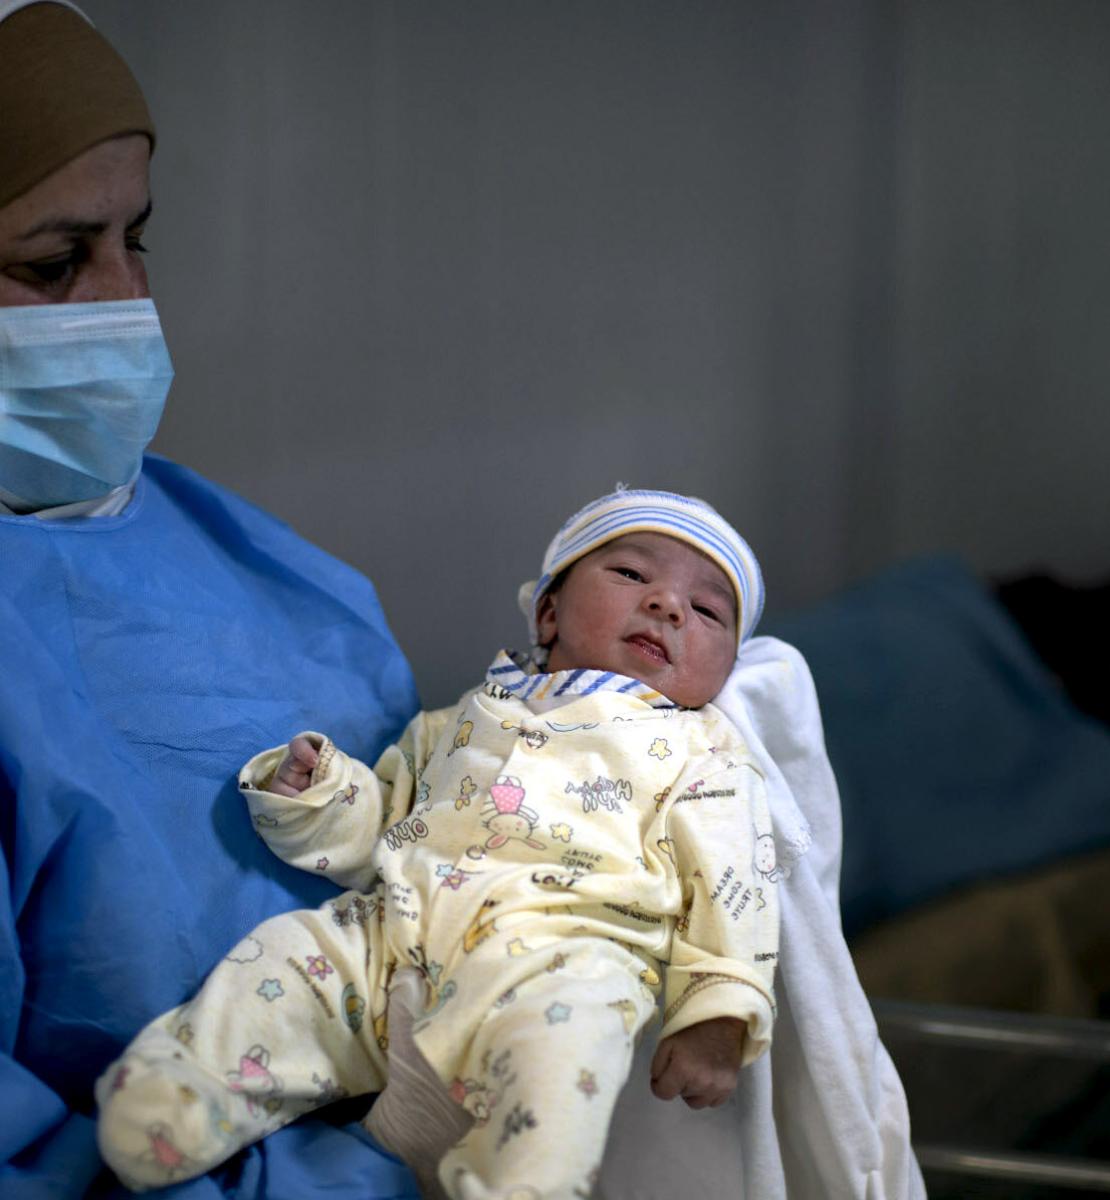 Medical staff at a medical facility at the Azraq Camps holds up a newborn baby.